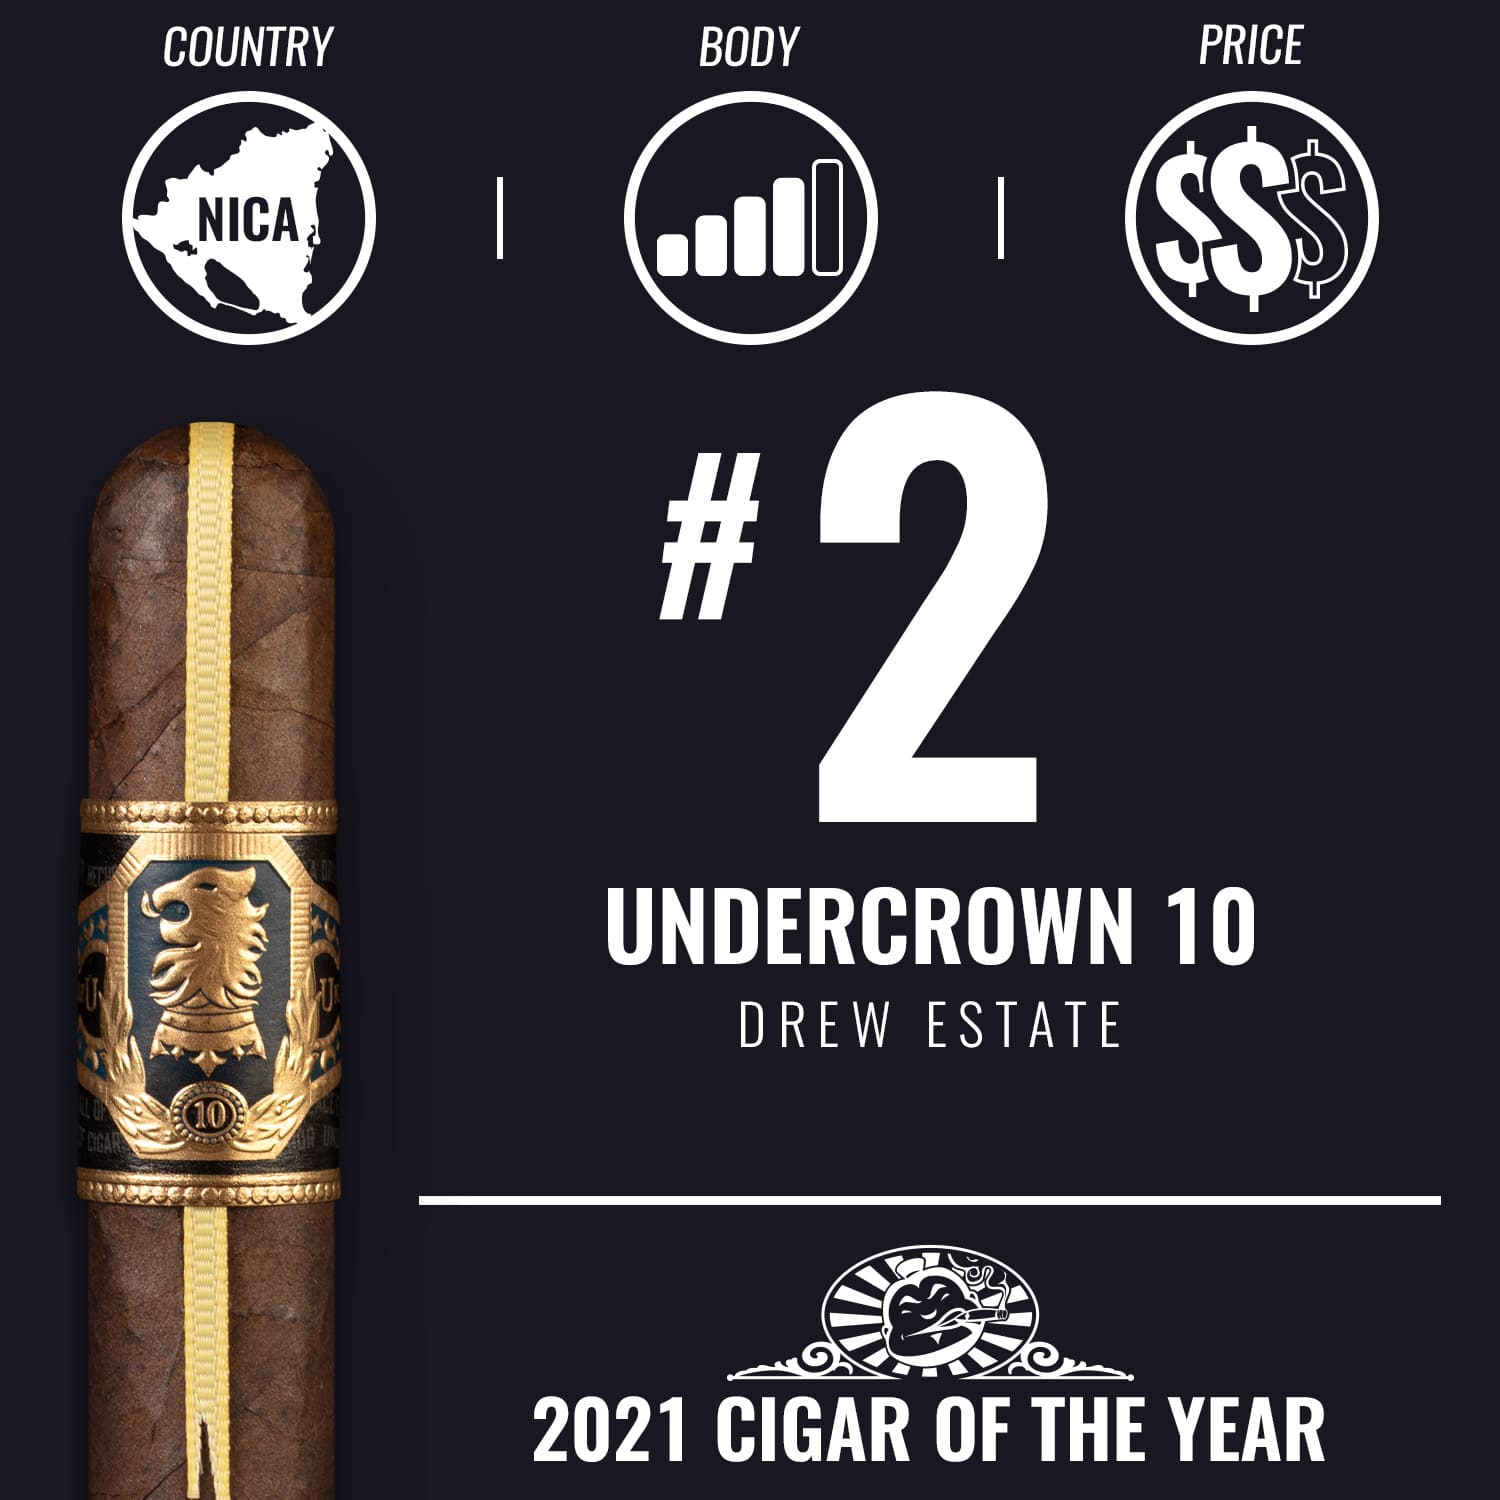 Undercrown 10 No. 2 Cigar of the Year 2021